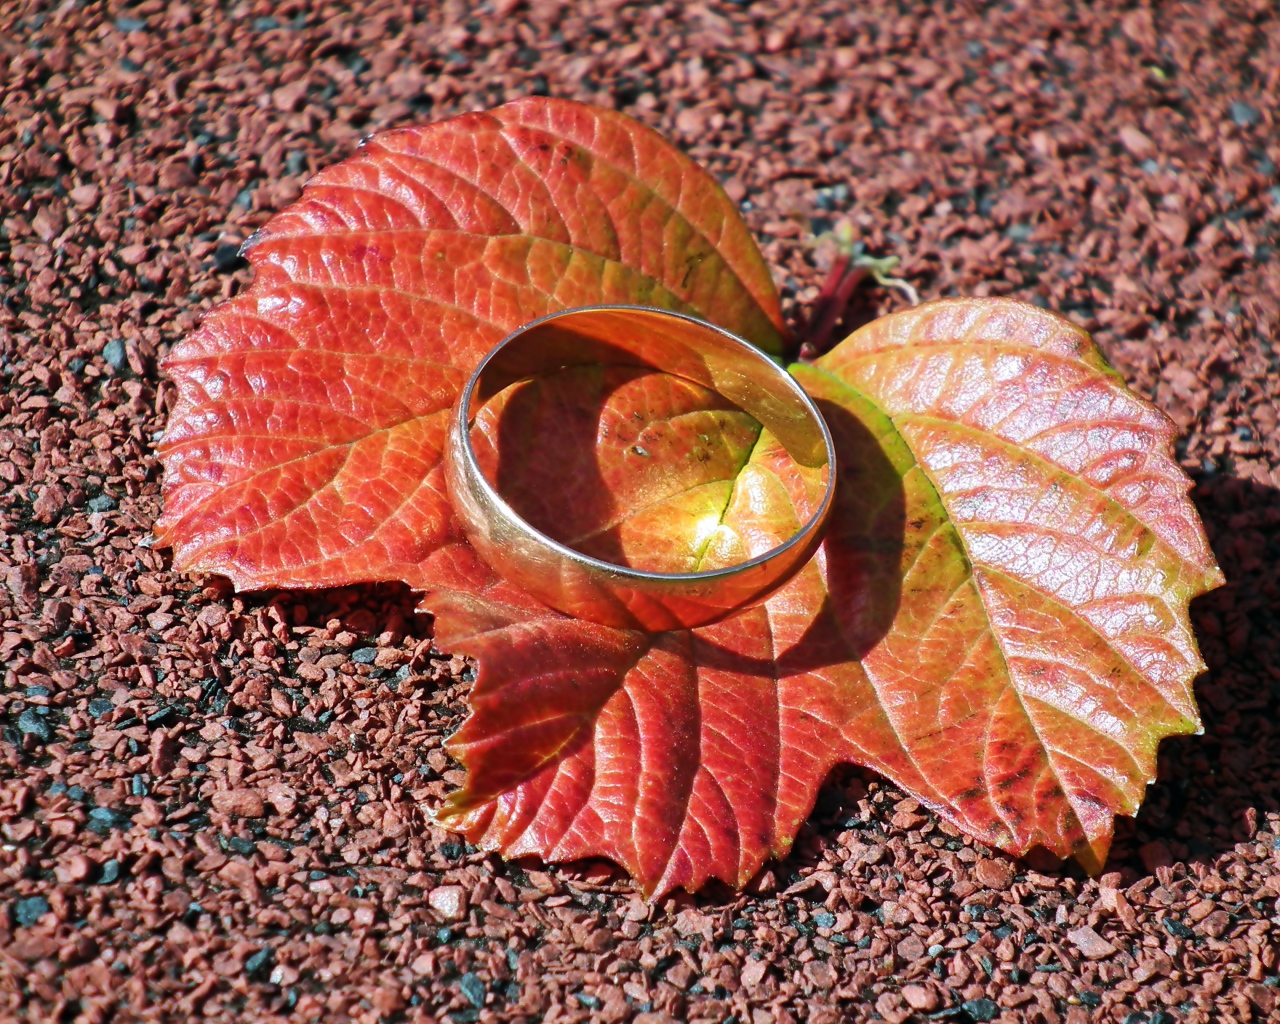 The silver ring lies on an orange leaf